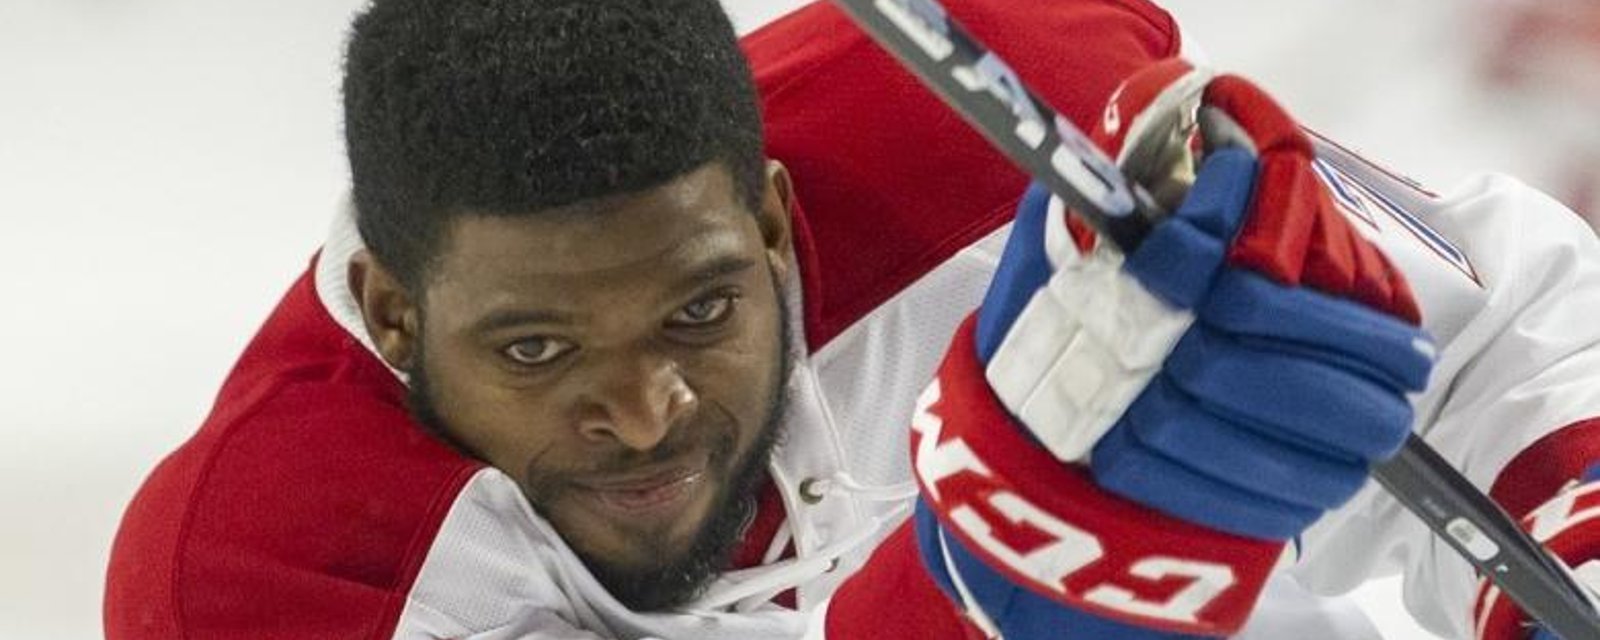 P.K. Subban takes out his own teammate with a shot to the face.